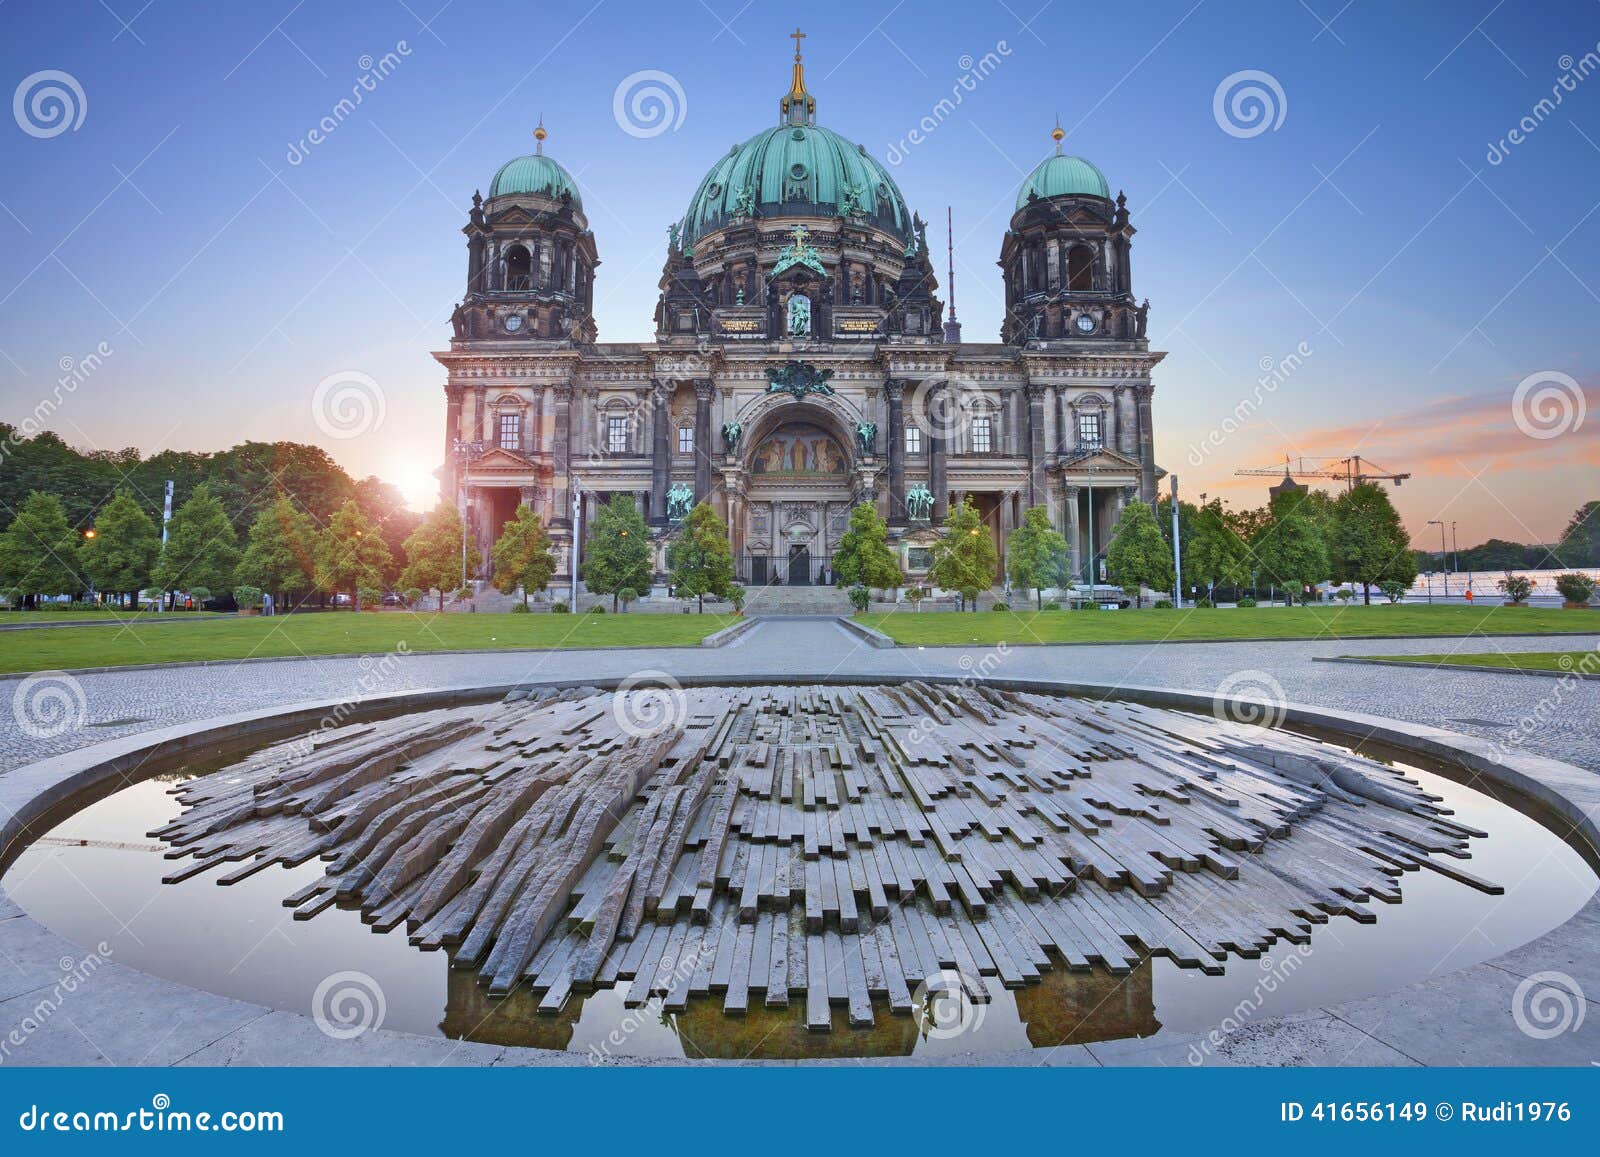 berlin cathedral.